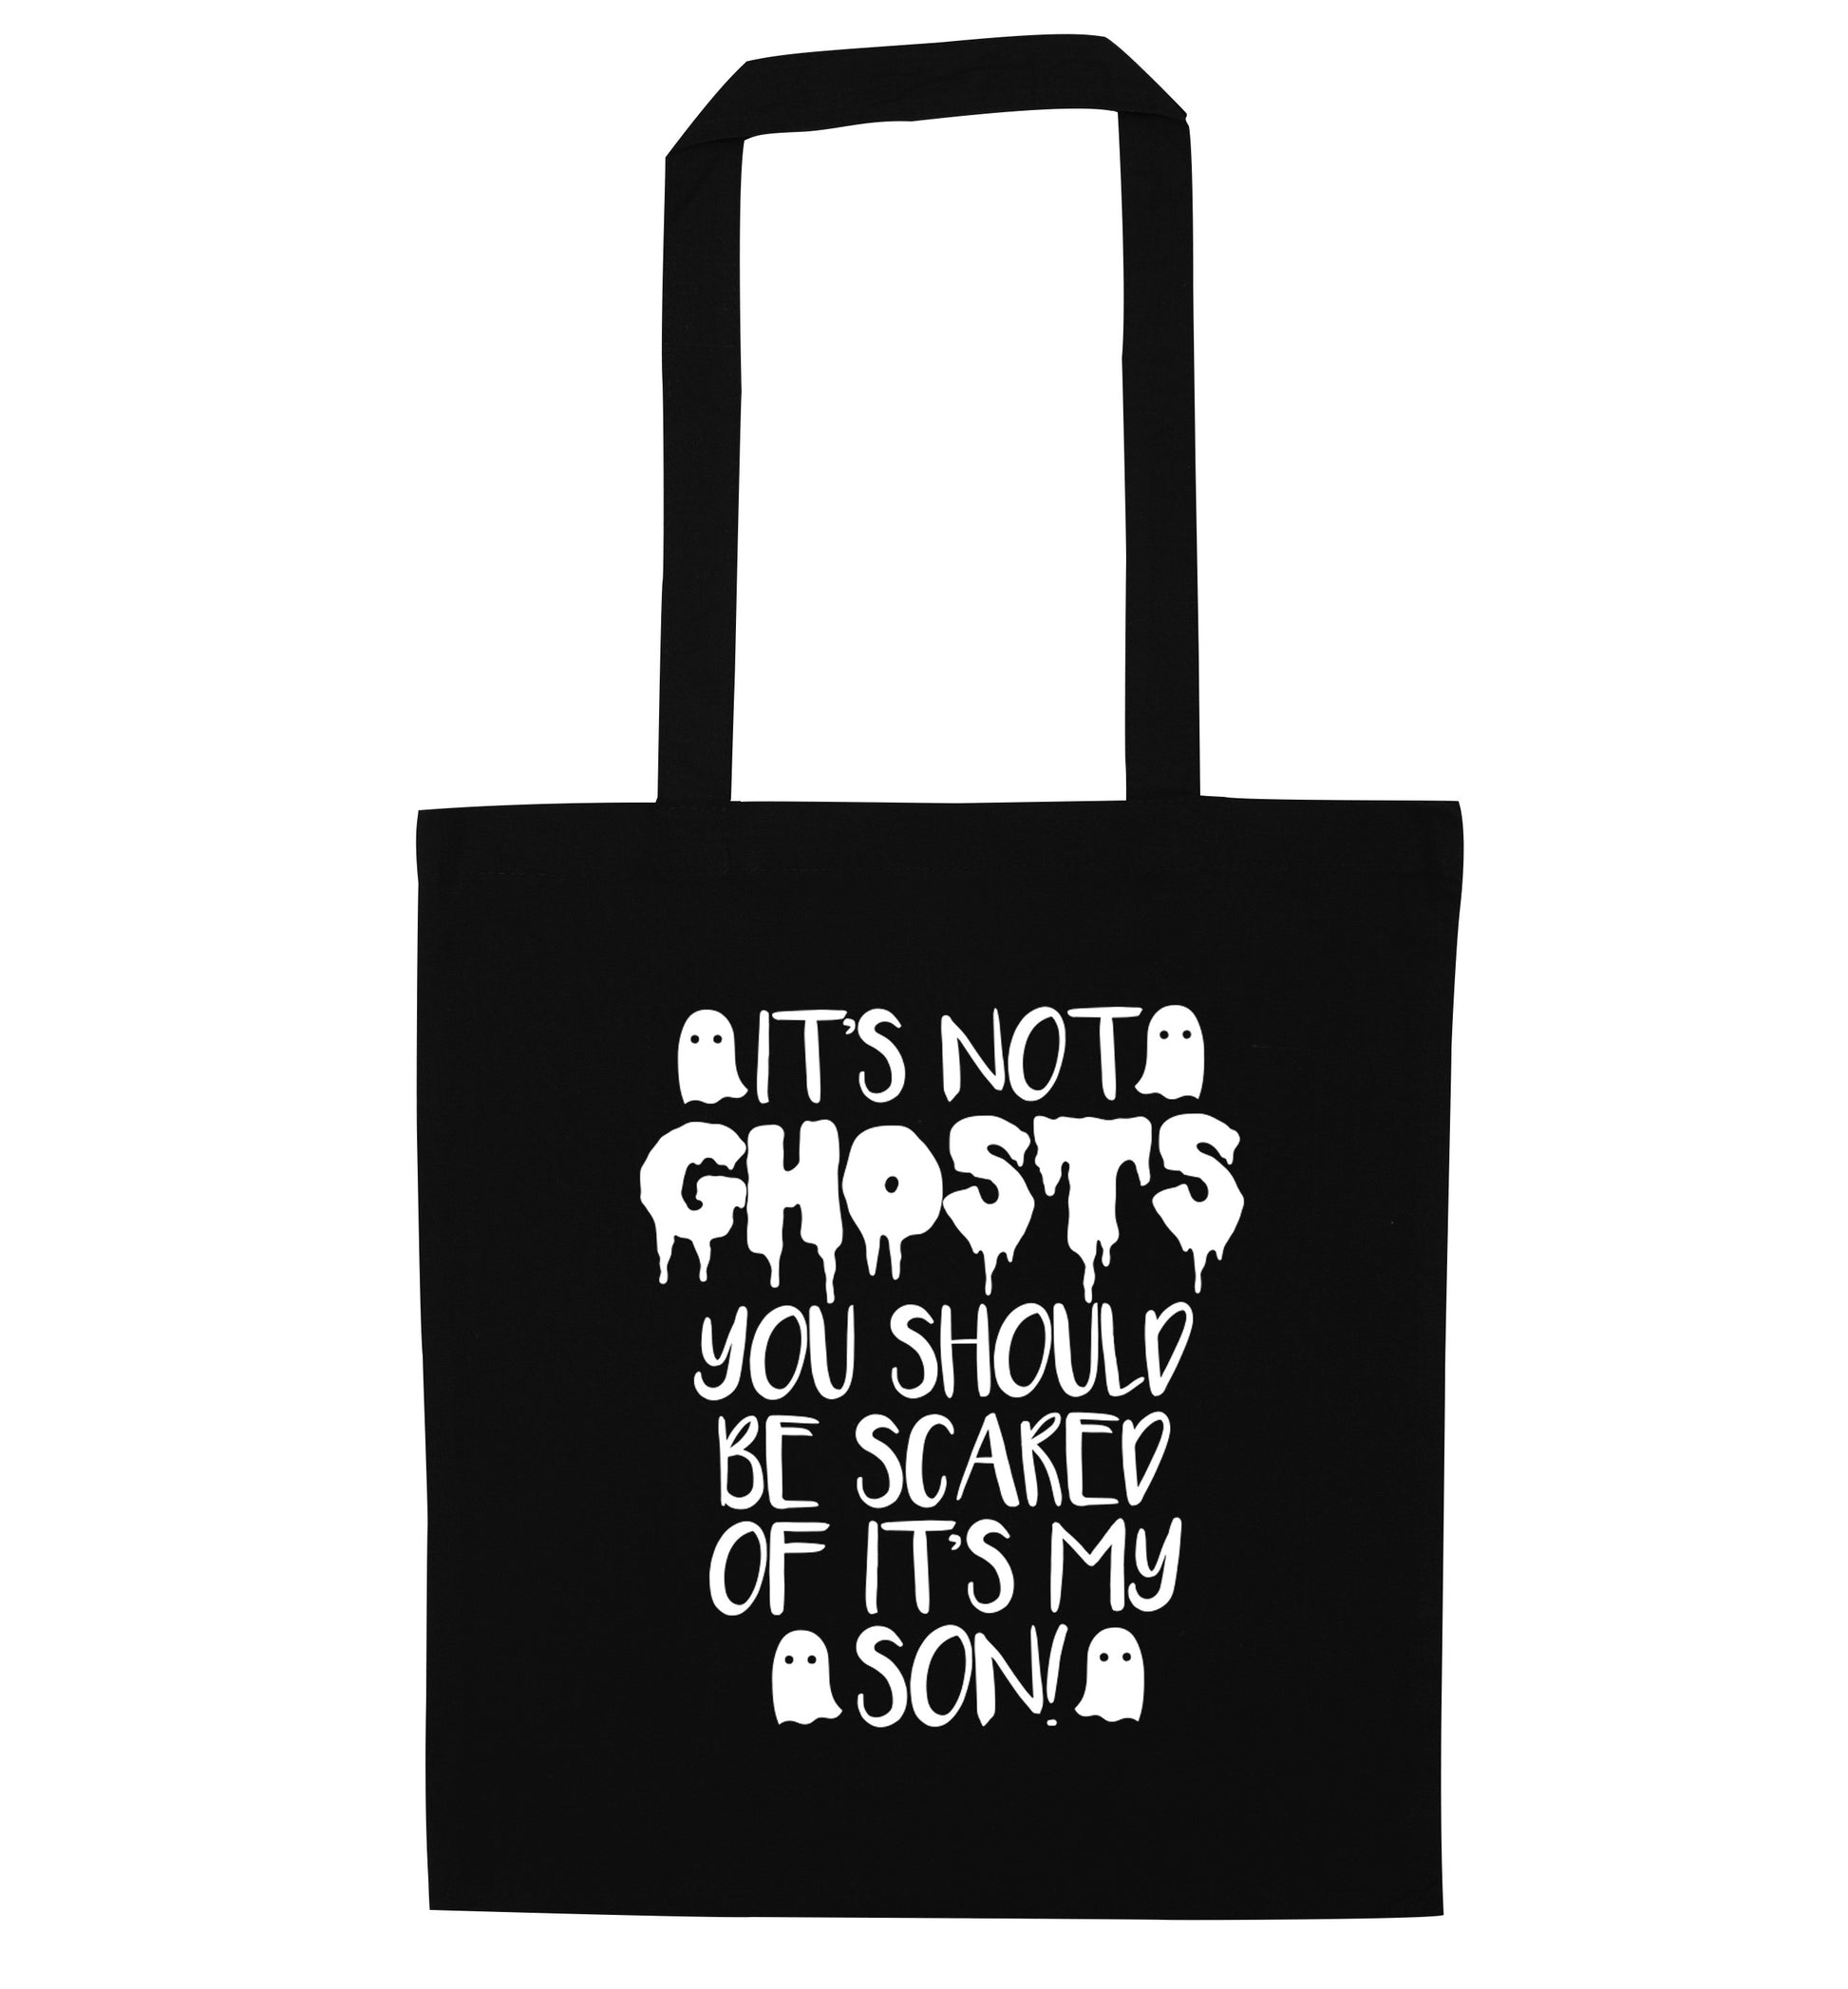 It's not ghosts you should be scared of it's my son! black tote bag